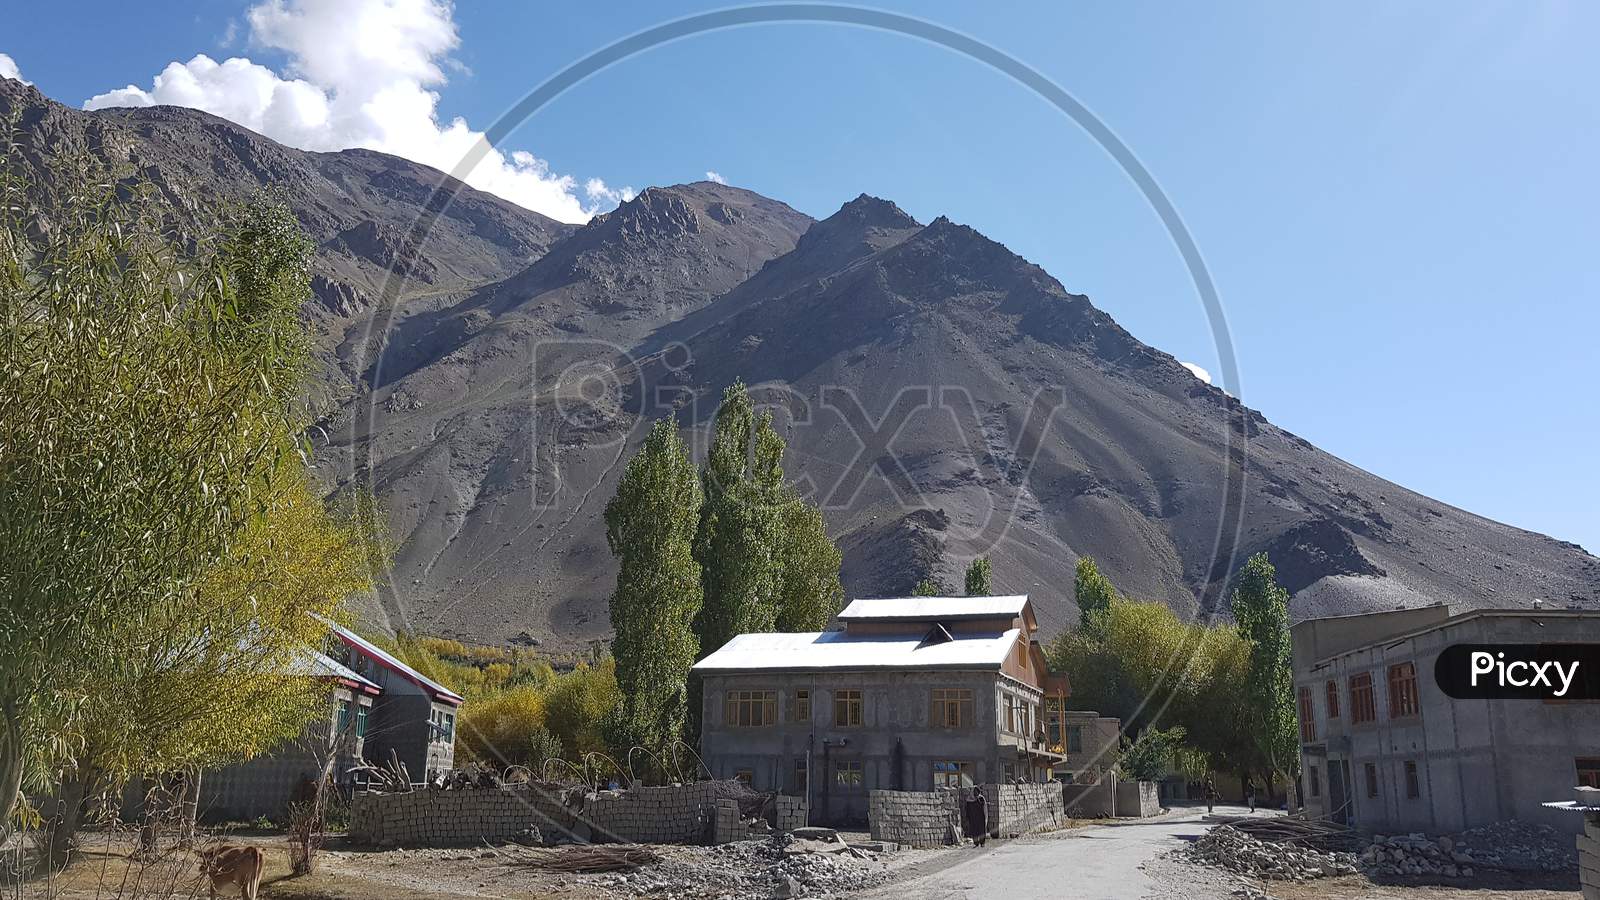 House Of A Kargil Resident In Jammu Kashmir And Ladakh Union Territory Hills Road Trees Are Also In Frame July 2019